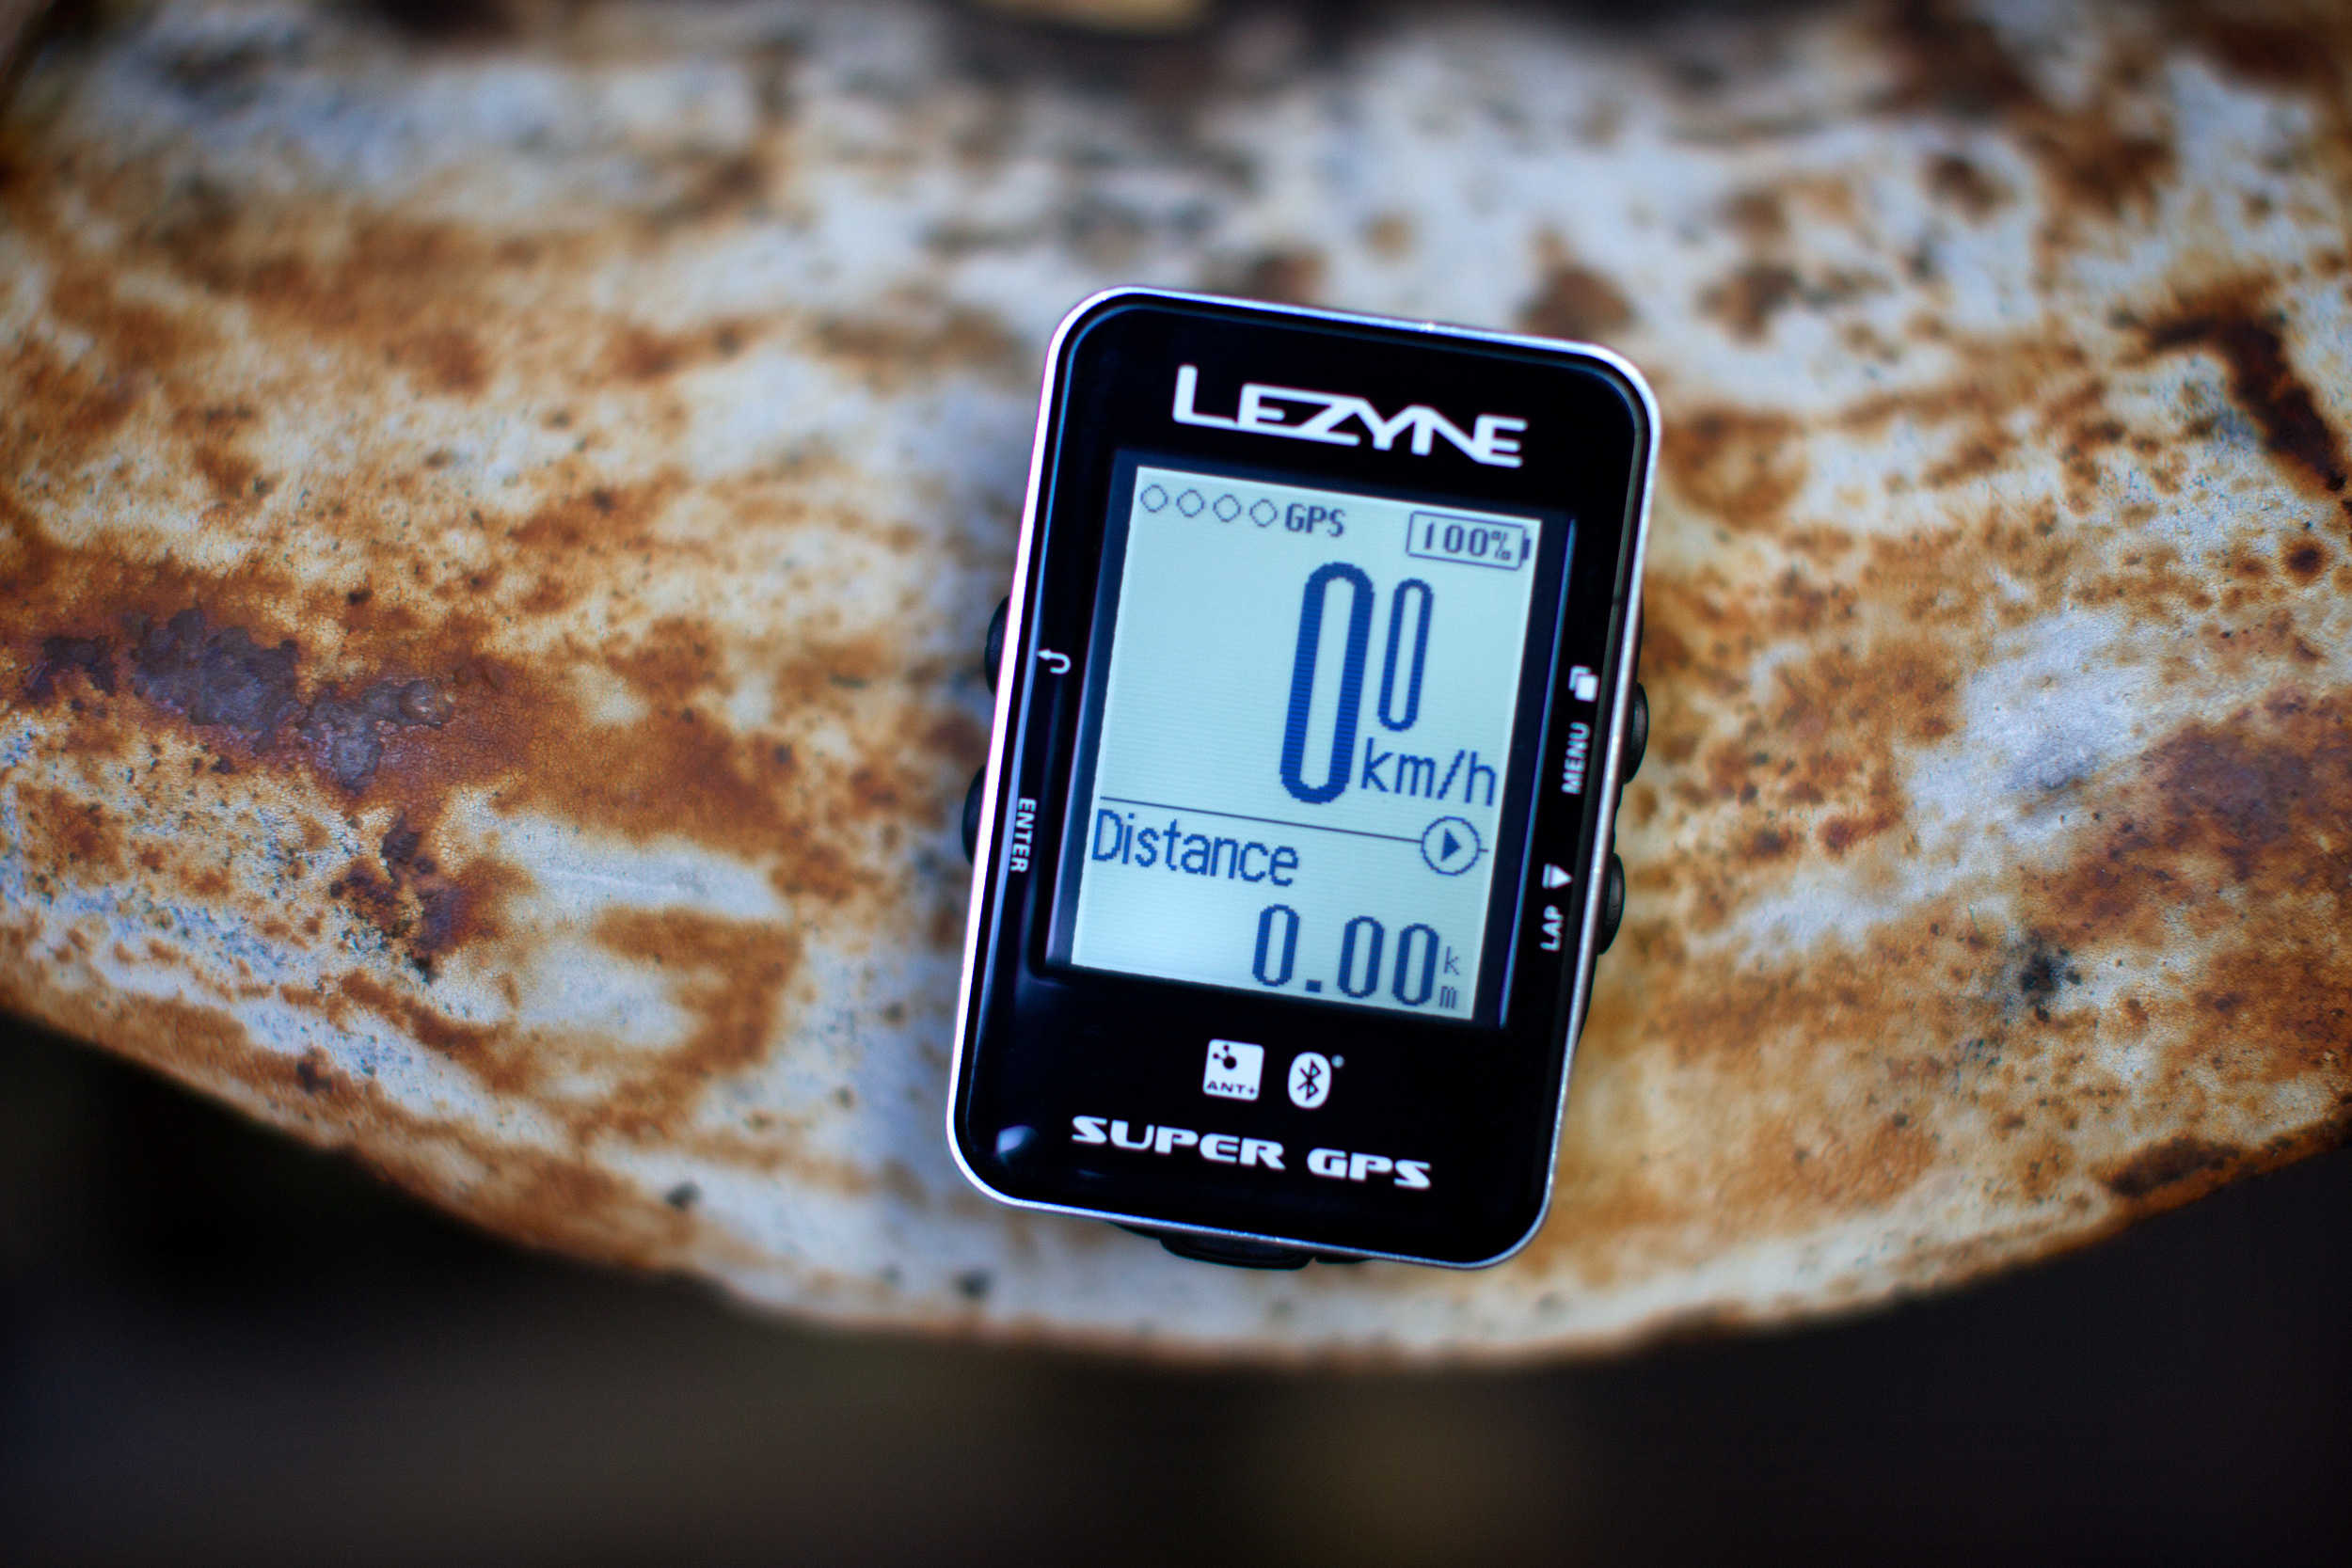 You'll rule the road with Lezyne's Super GPS bicycle computer.